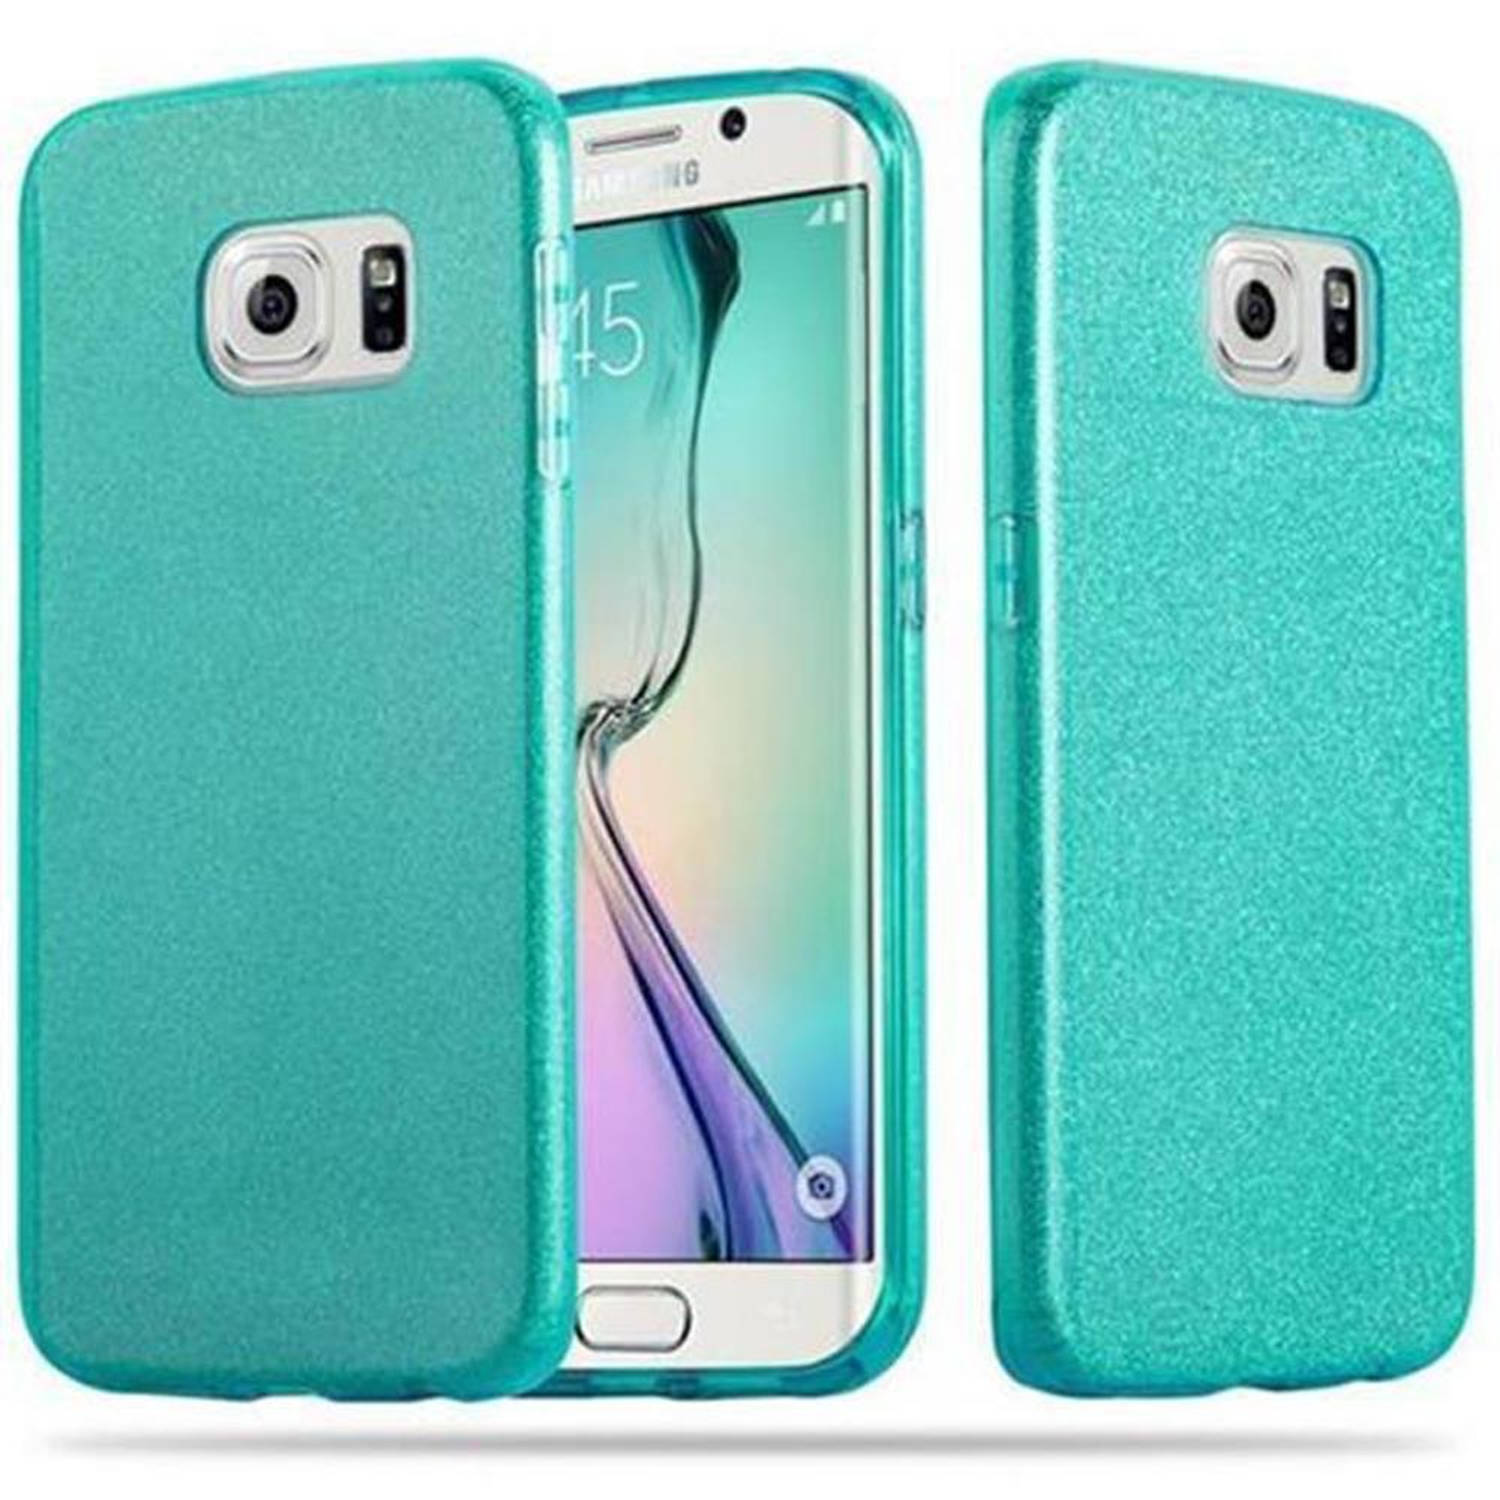 Cadorabo Hoesje geschikt voor Samsung Galaxy S6 EDGE in STAR STOF TURKOOIS TPU Silicone Case Cover b